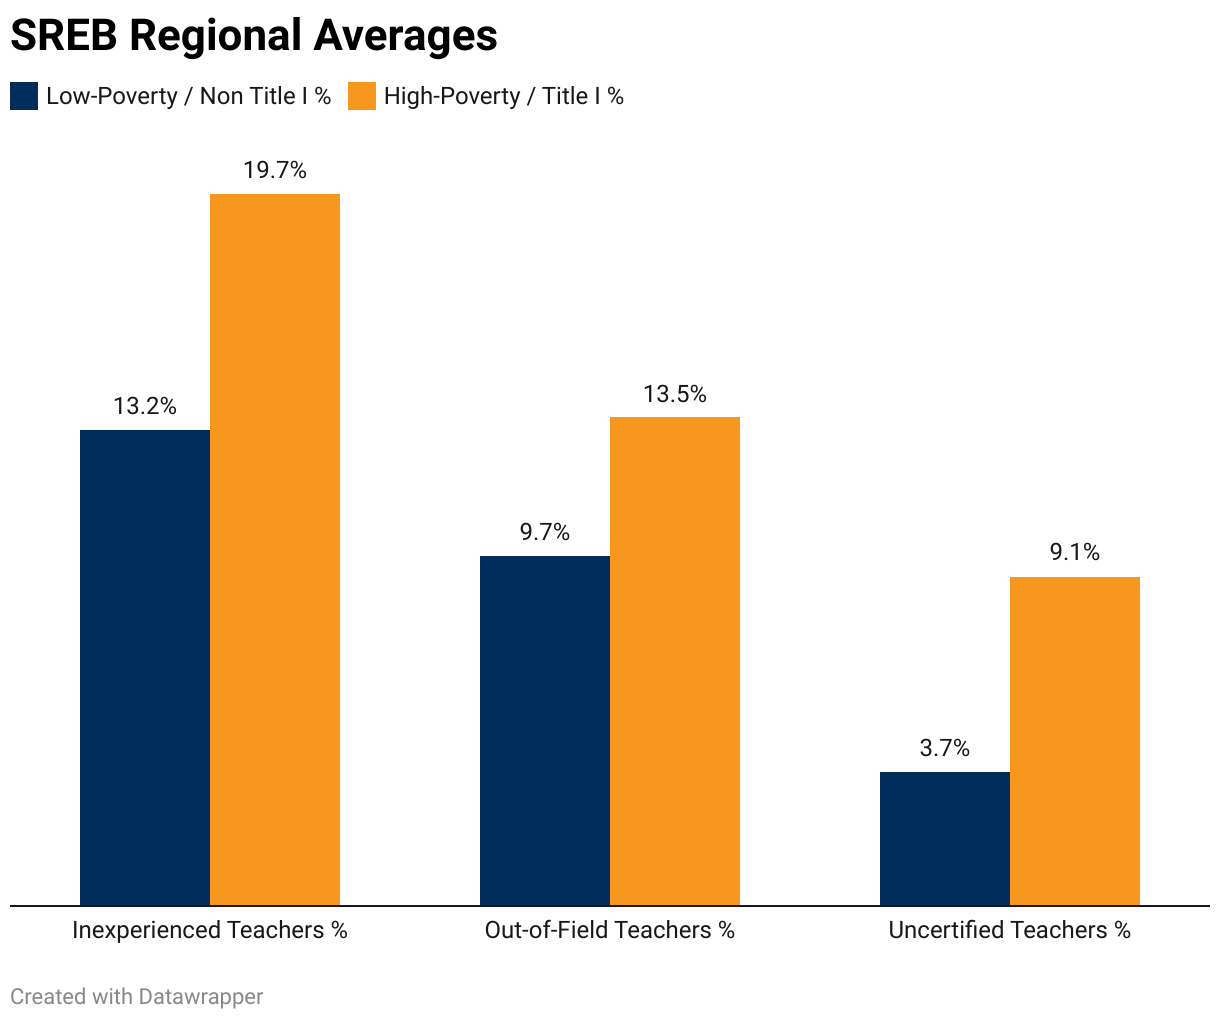 A grouped column chart showing the percentage of inexperienced, out-of-field and uncertified teachers in low-poverty non-Title I schools vs. higher-poverty Title I schools AS AVERAGES FOR THE SREB REGION.